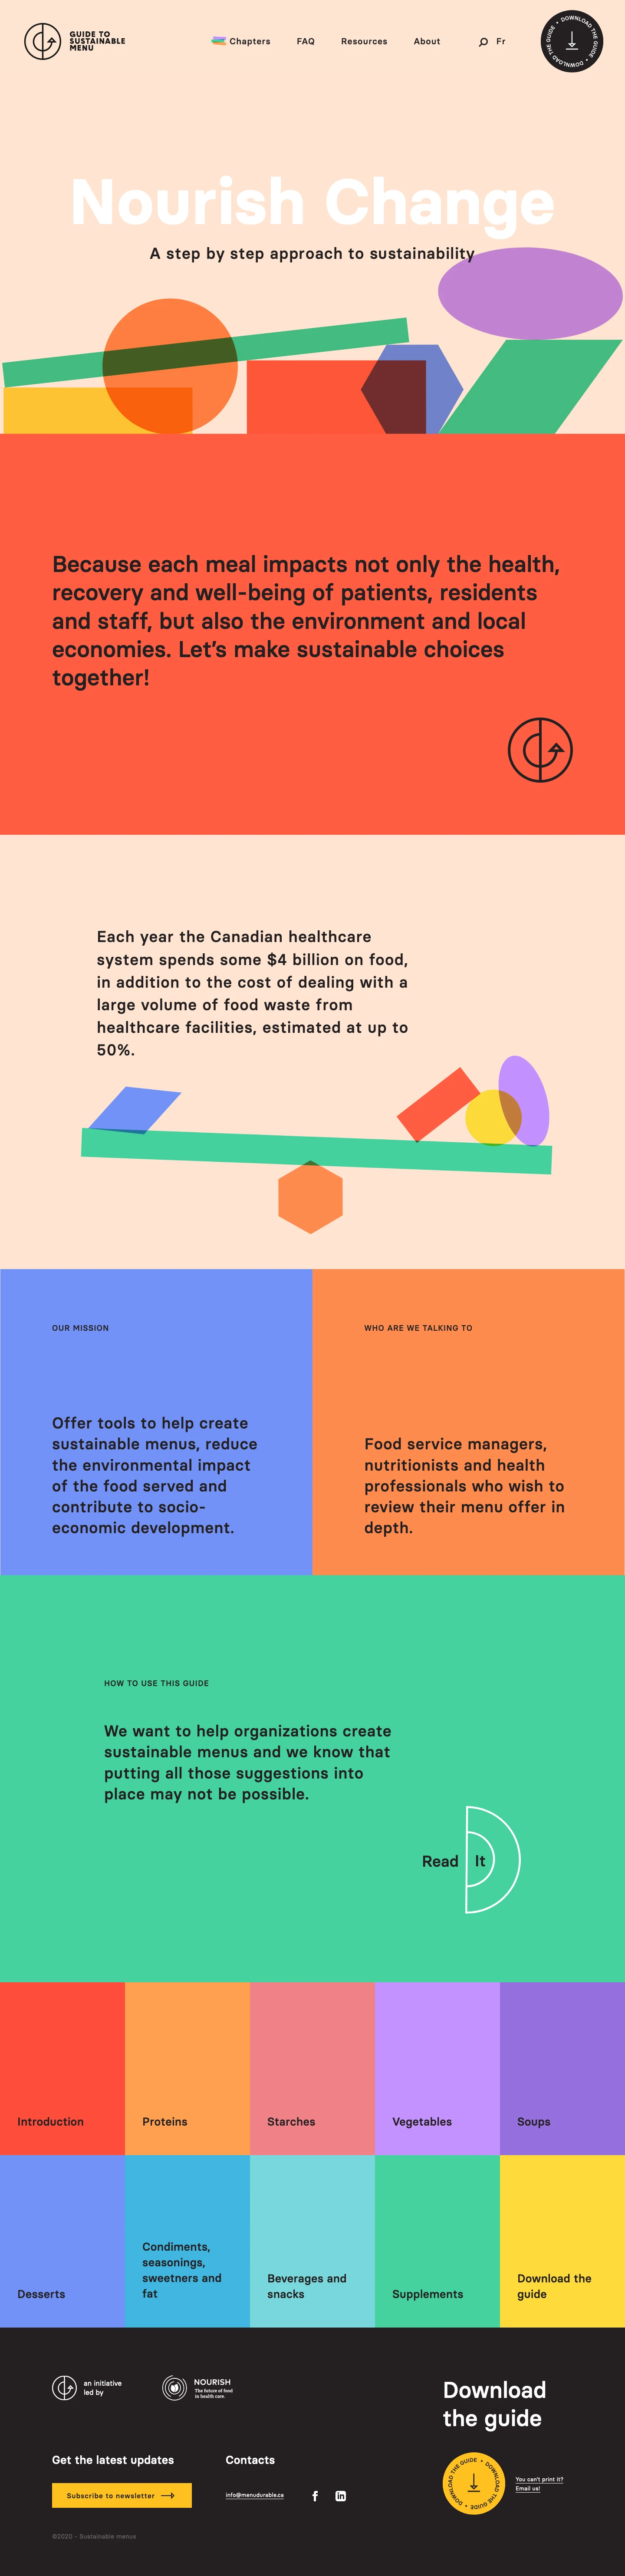 Sustainable Menus Landing Page Example: Because each meal impacts not only the health, recovery and well-being of patients, residents and staff, but also the environment and local economies. Let’s make sustainable choices together!